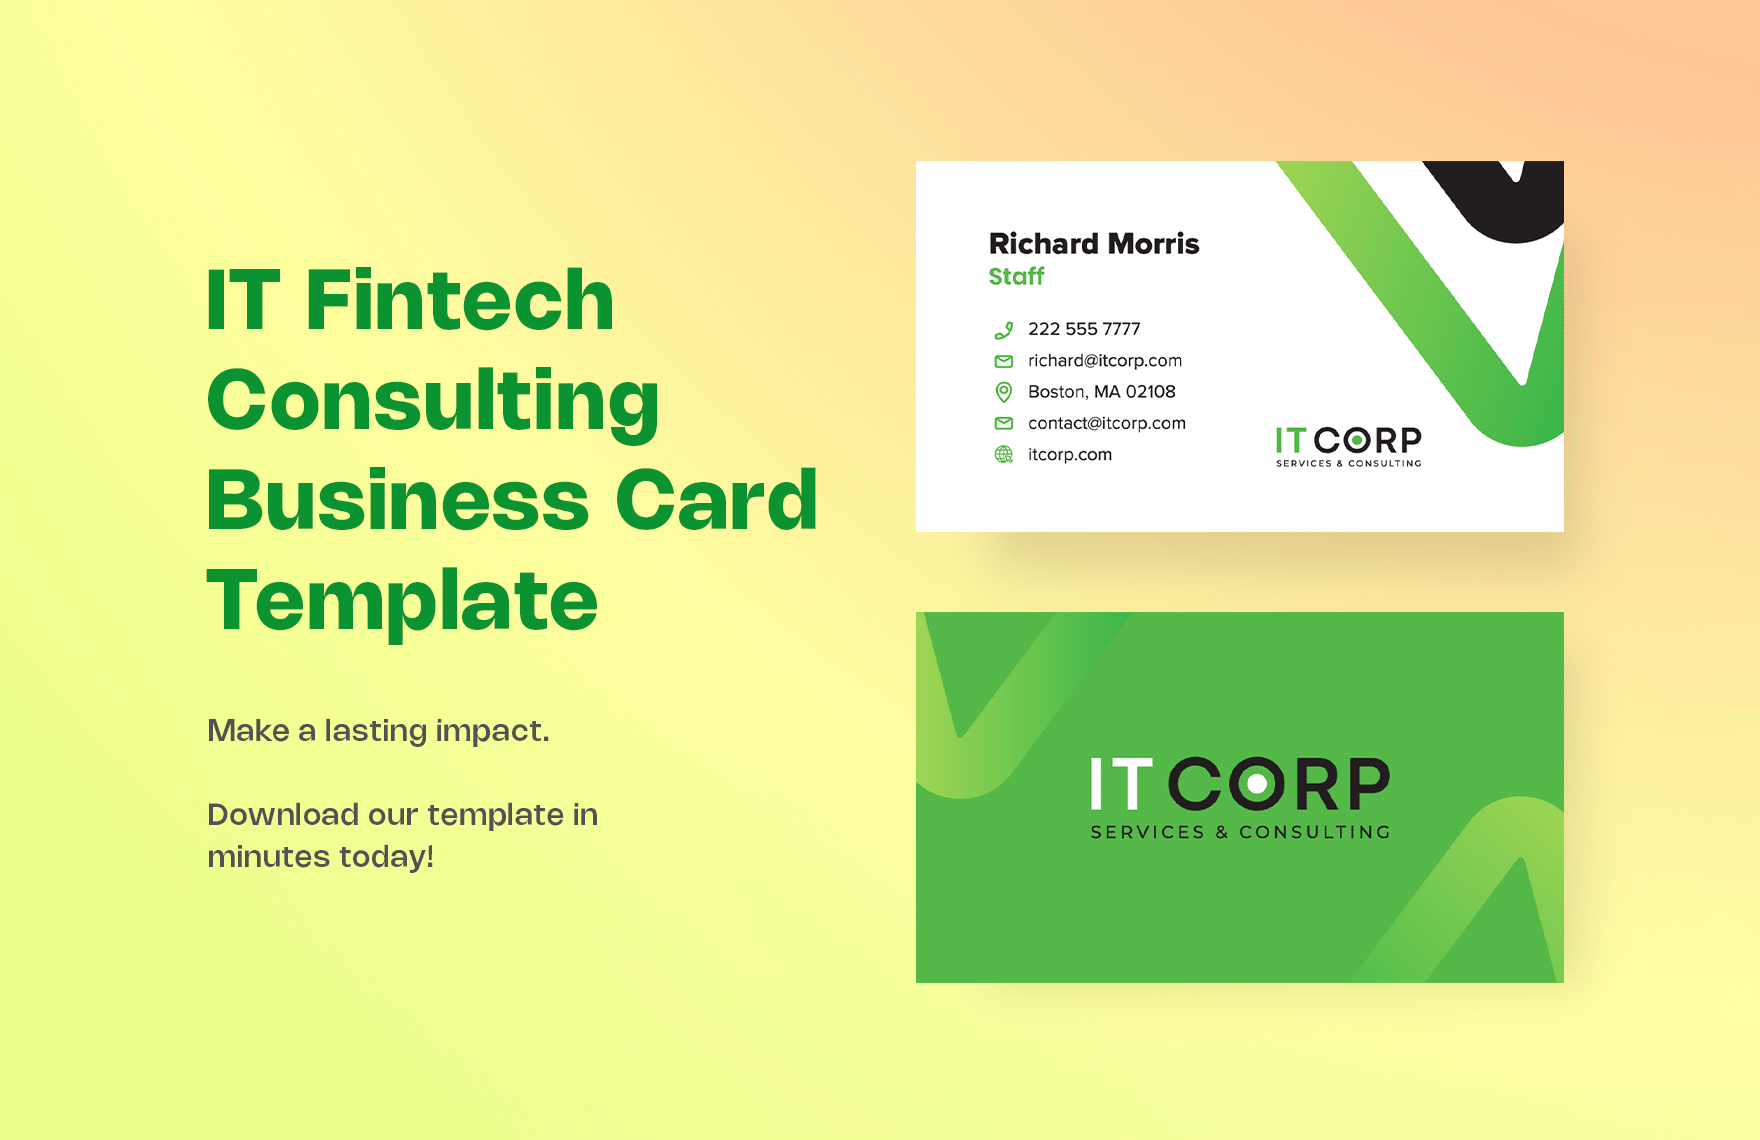 IT Fintech Consulting Business Card Template